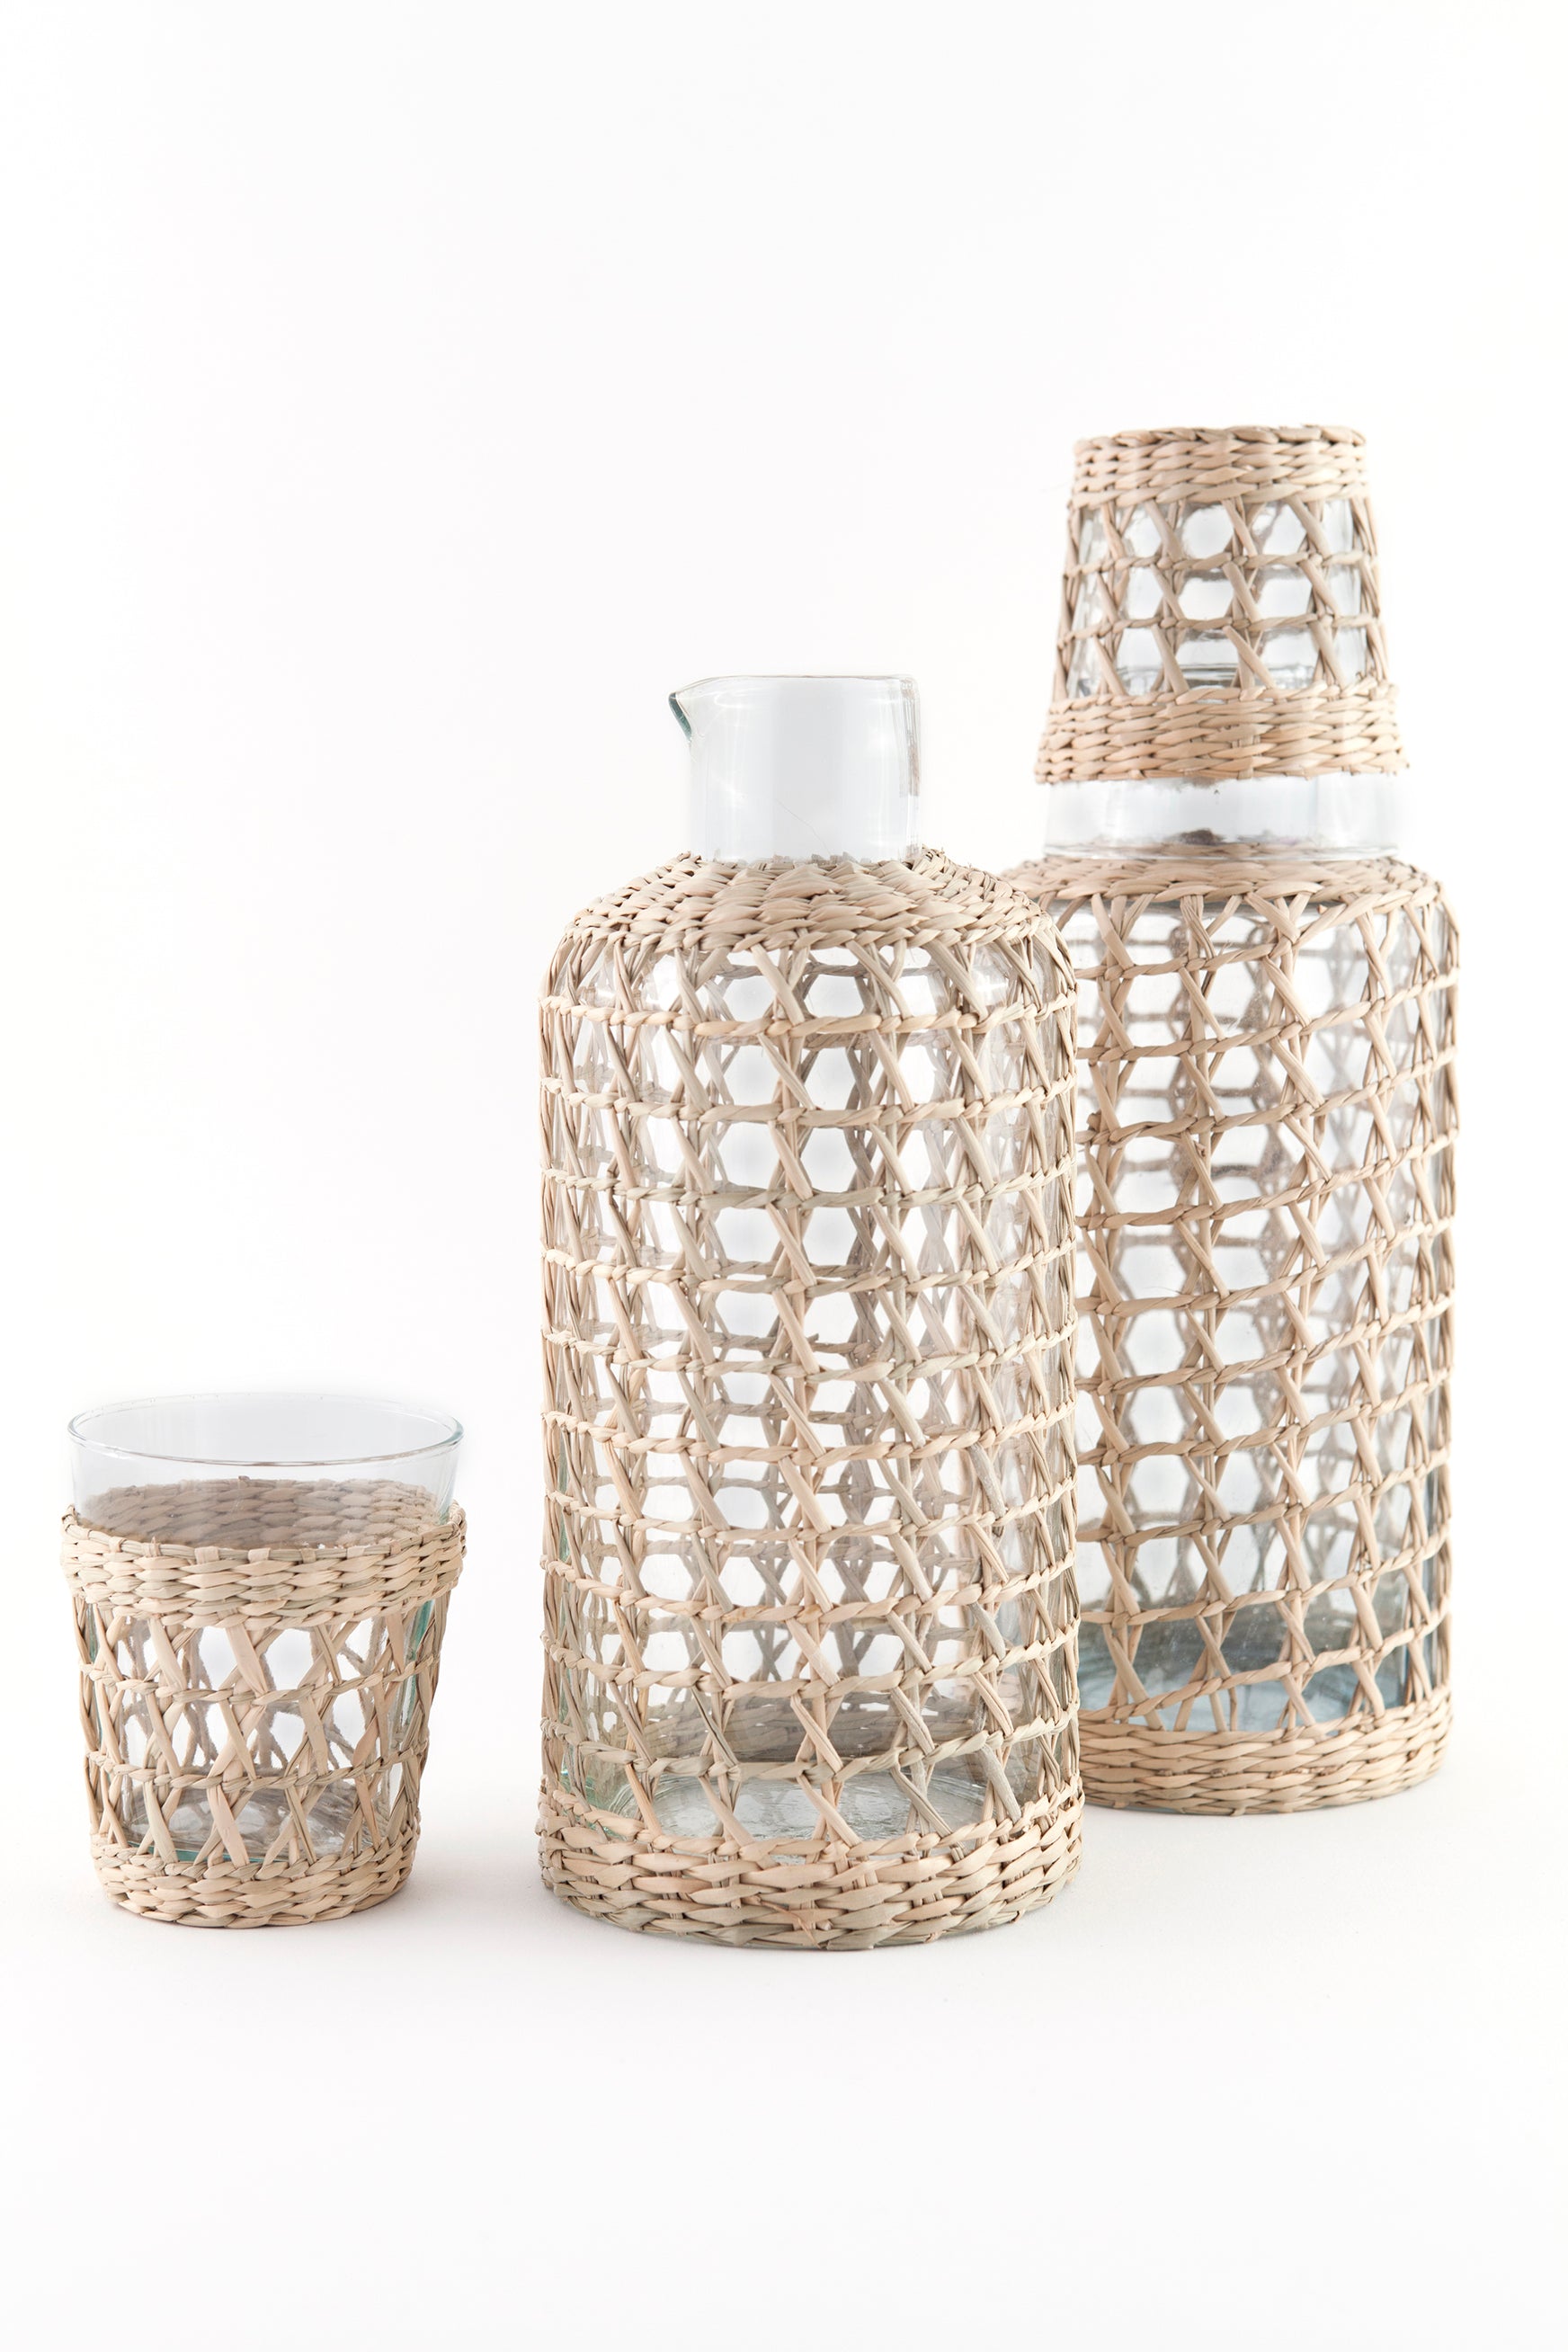 Seagrass Cage Wide Tumbler Glass Seagrass Brand_Seagrass & Rattan Champagne Flutes Cocktail Kitchen_Drinkware January_2017_Products_LG0176